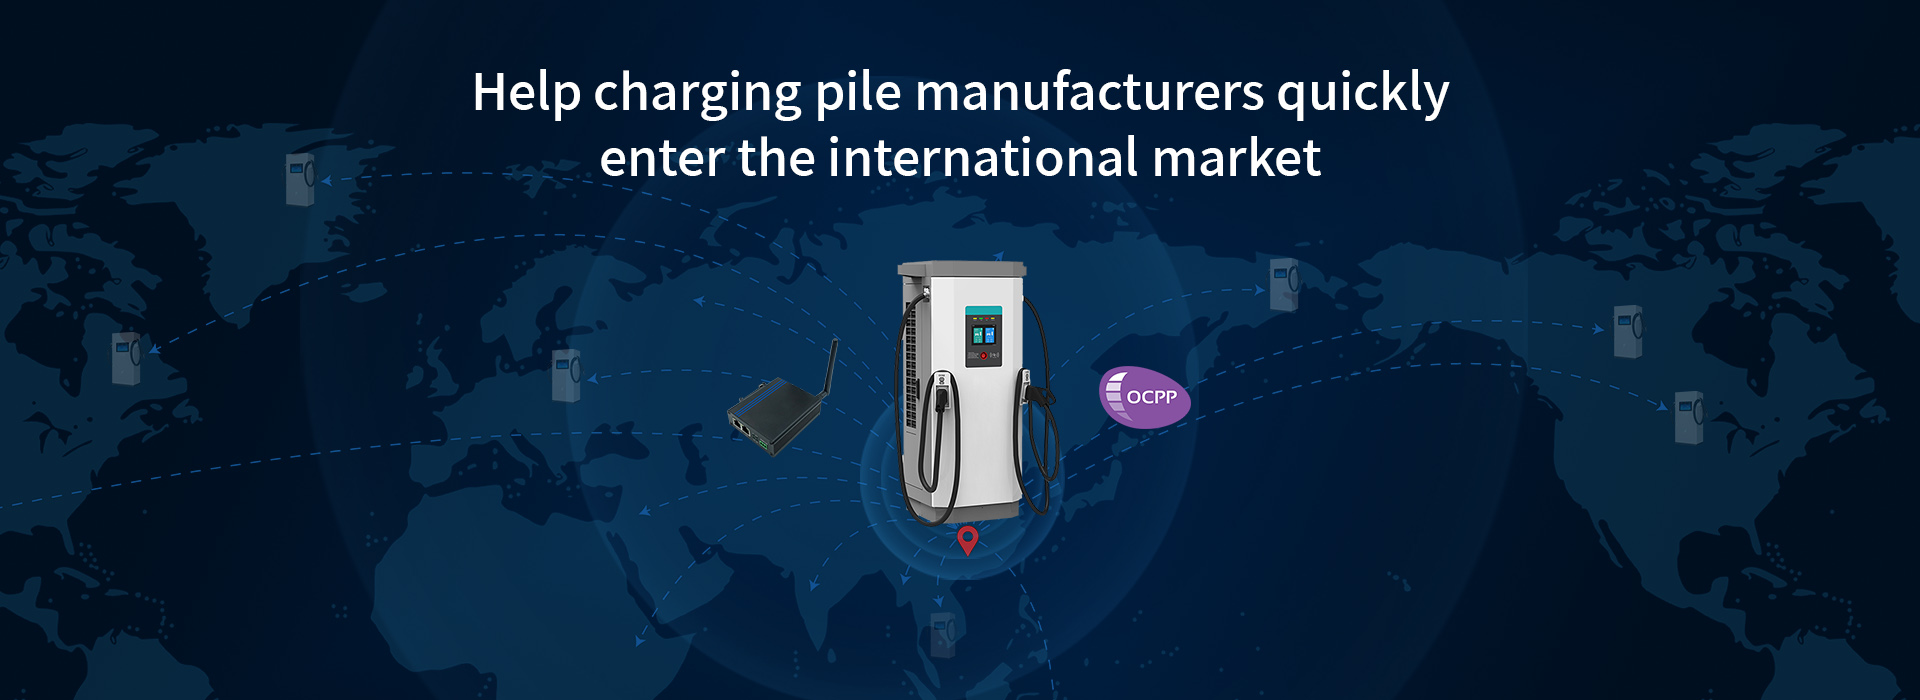 Help charging pile manufacturers quickly enter the international market